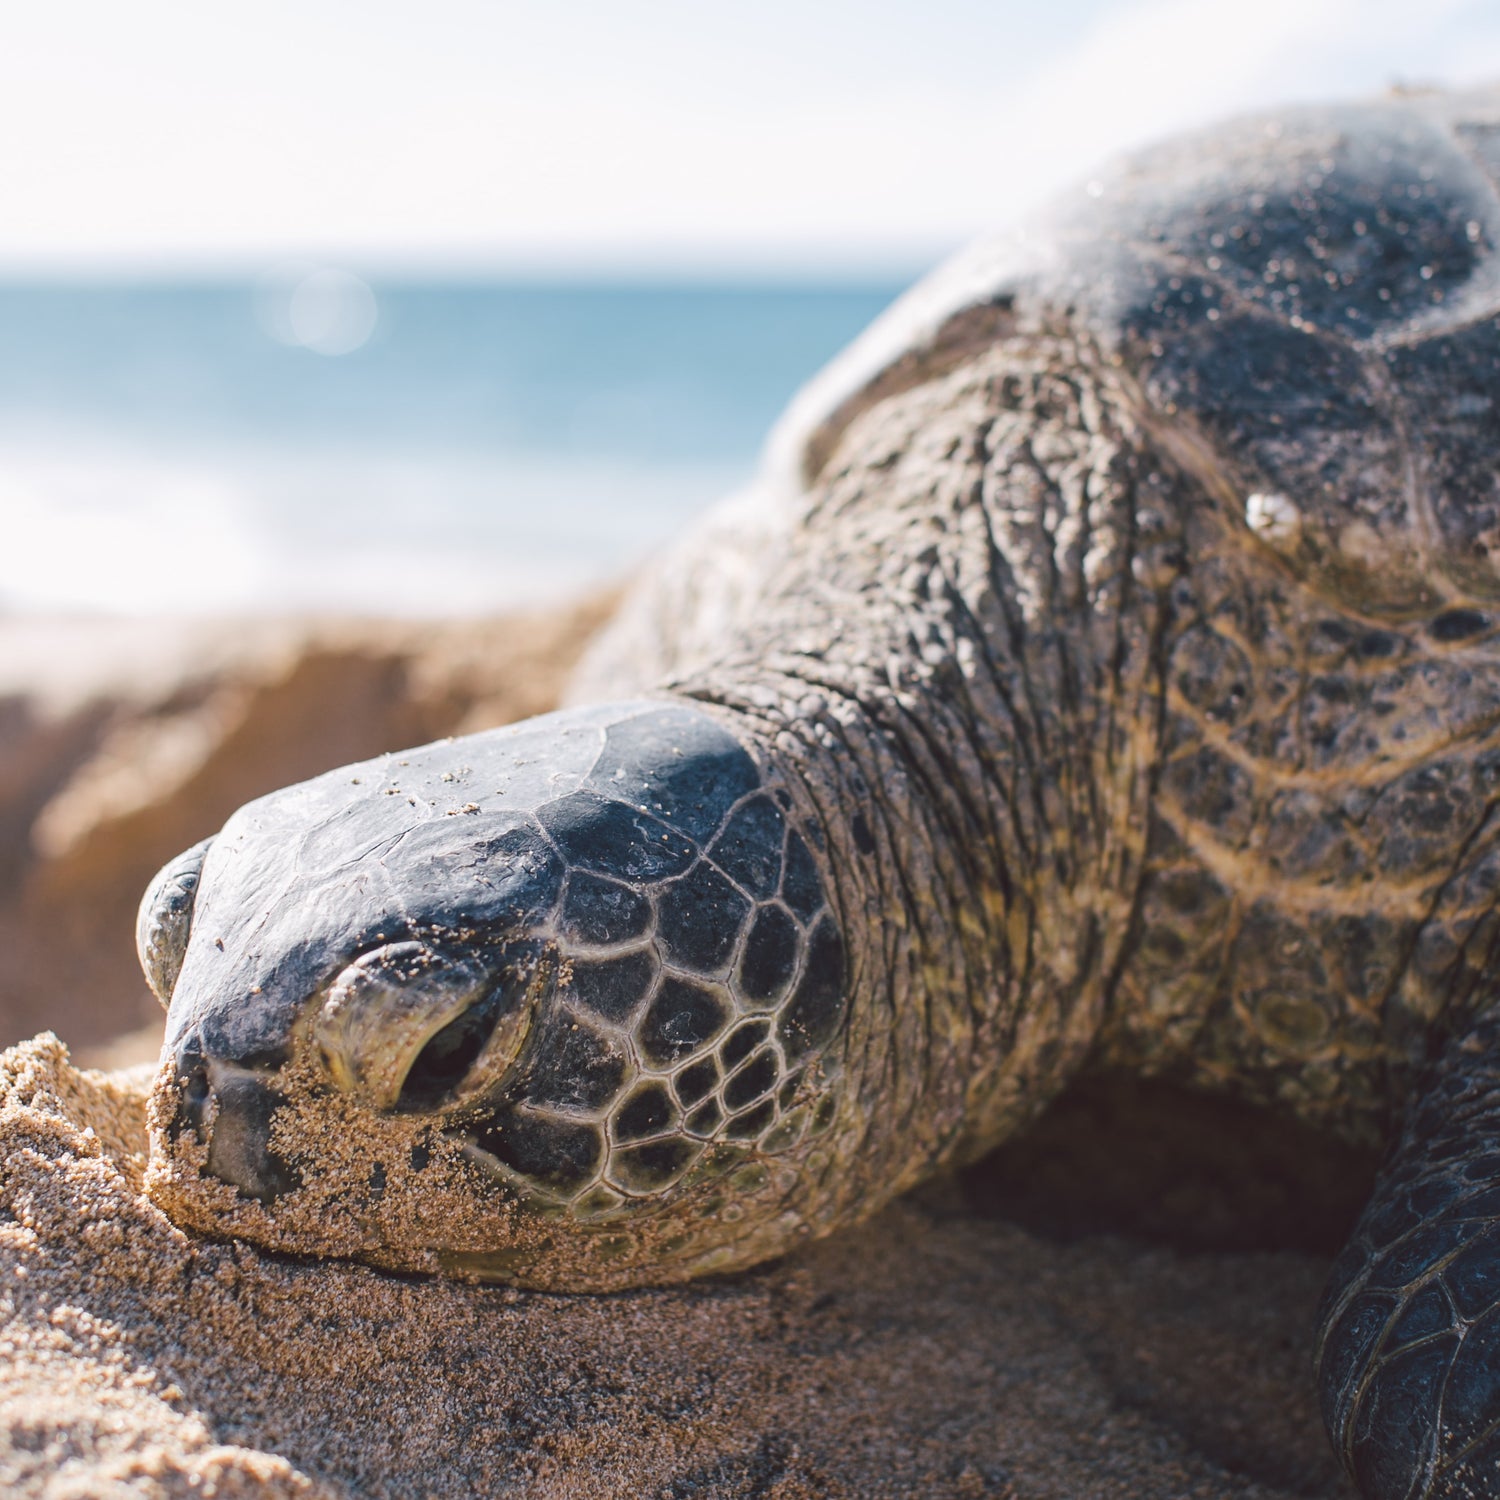 sea turtle resting on a beach in the sunlight - architectconstructor donates 10% to Sea Turtle Conservancy conservation efforts